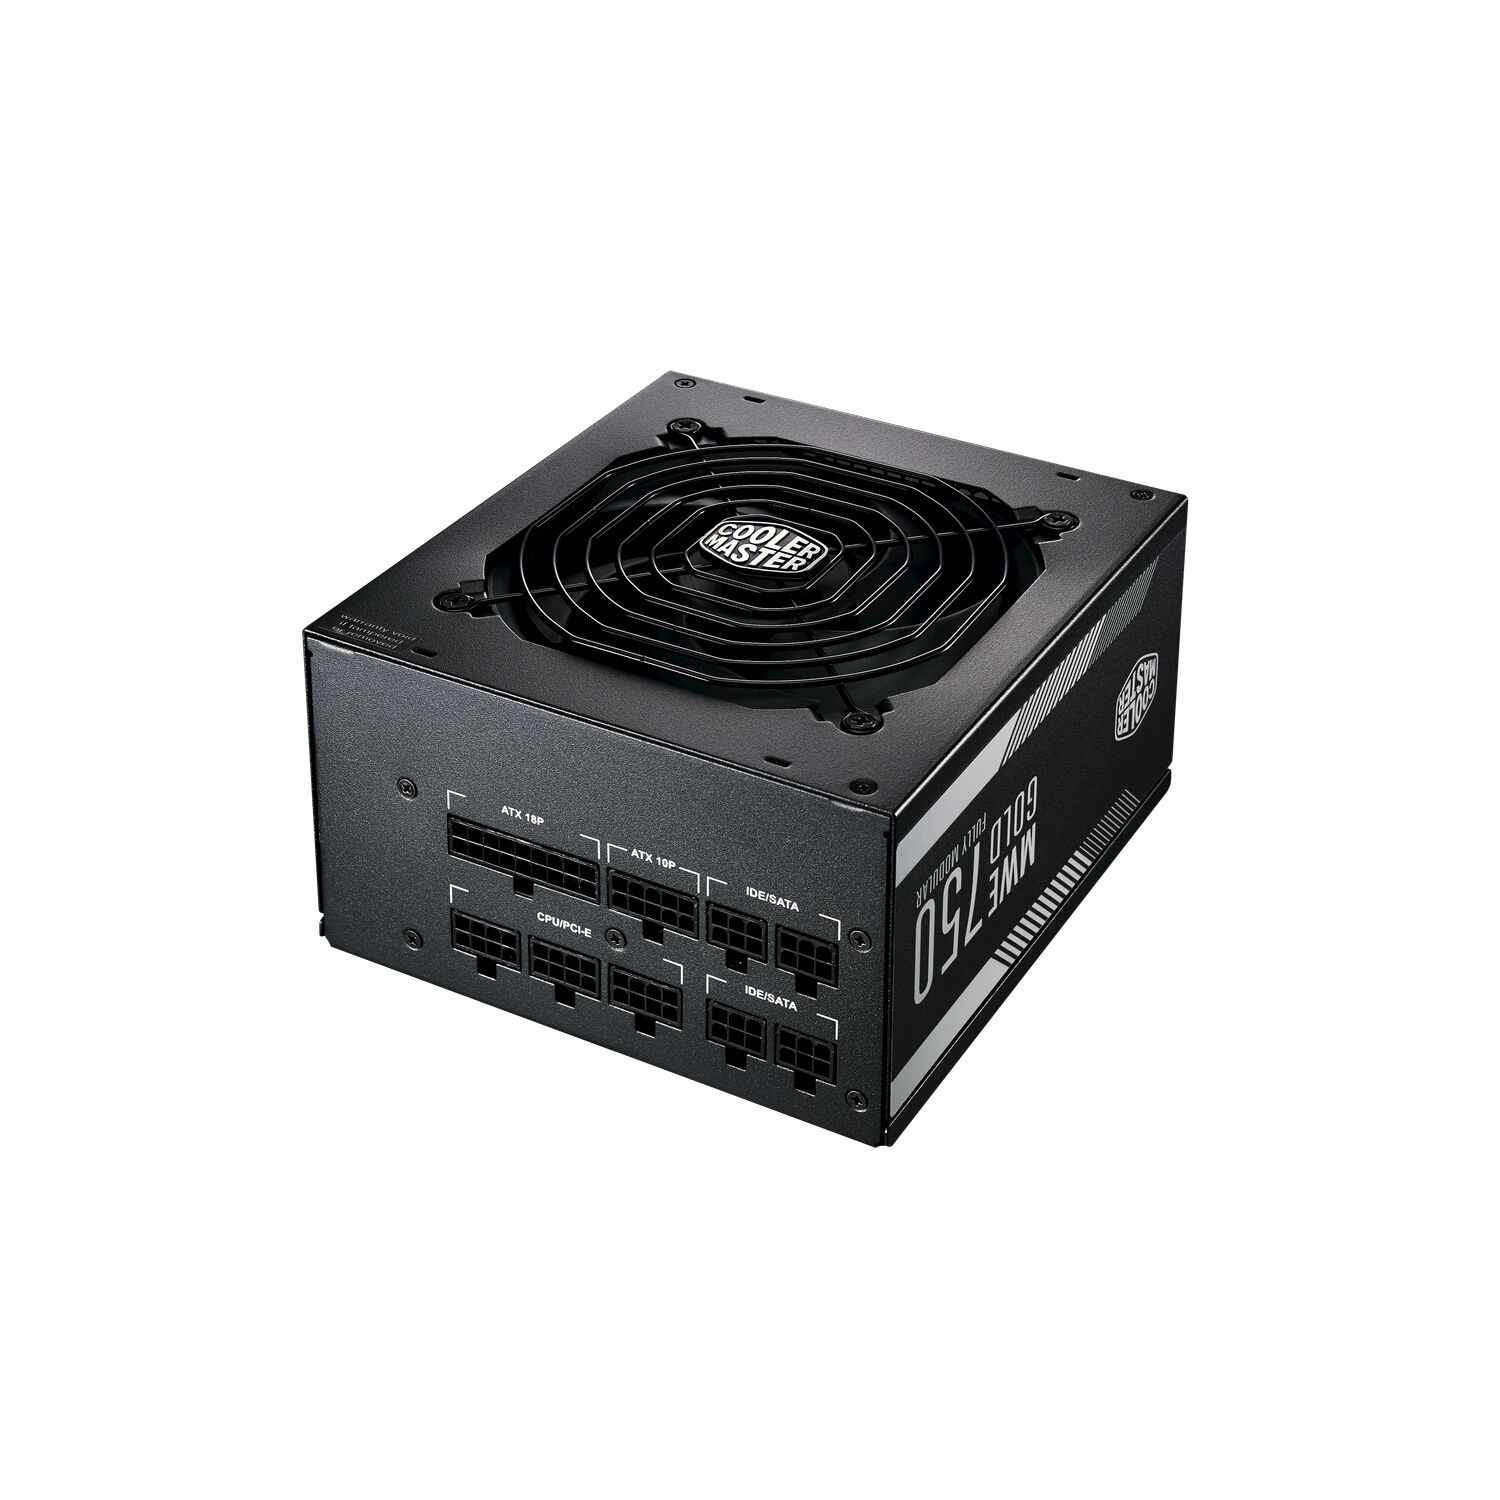 Alimentation atx 700W 80+ Gold PURE POWER 11 BN299 be quiet